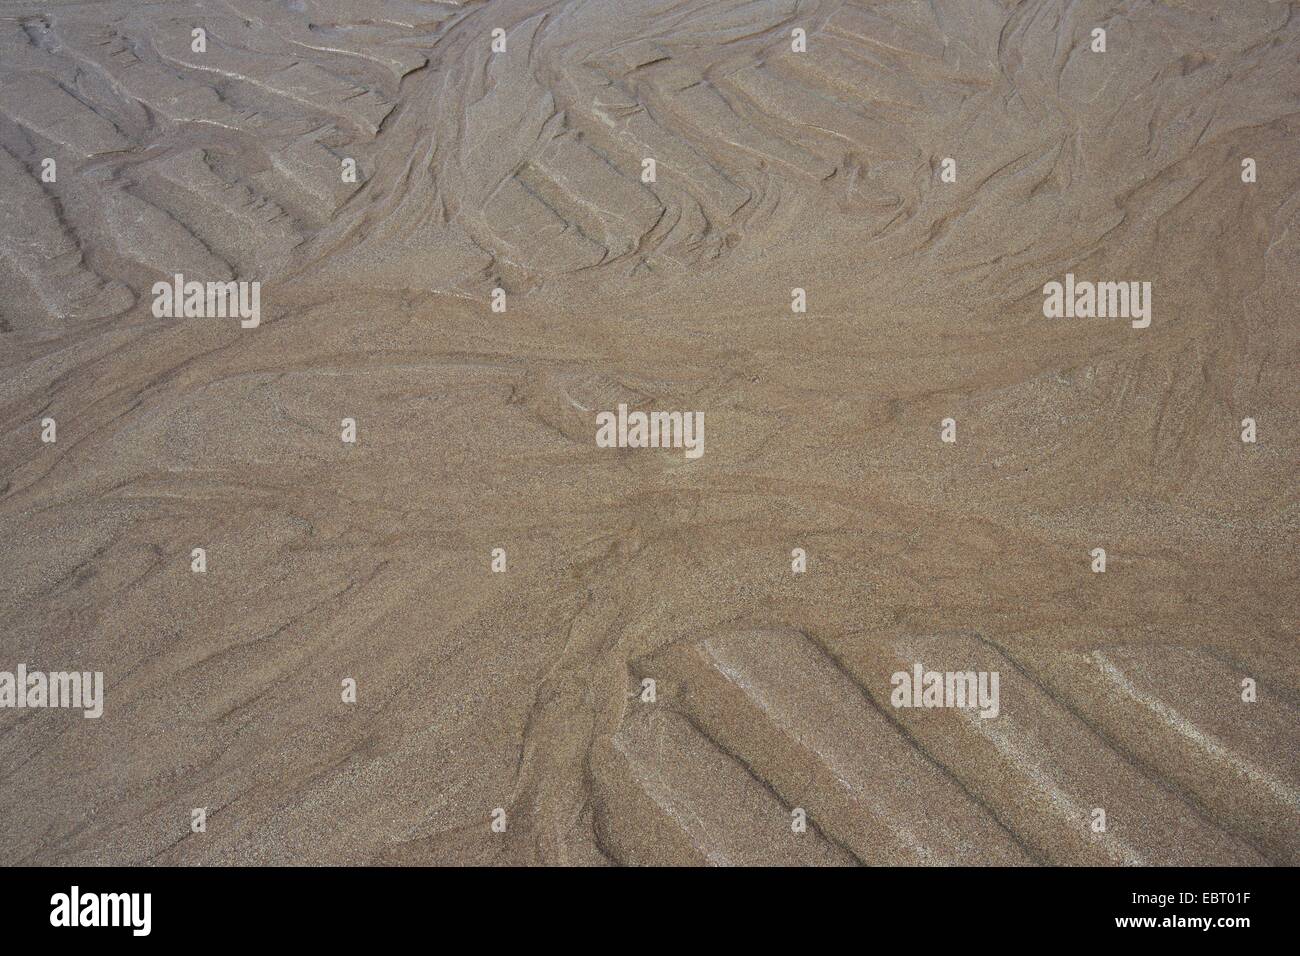 ripple marks in the sand on the beach, United Kingdom, Scotland, Sutherland Stock Photo